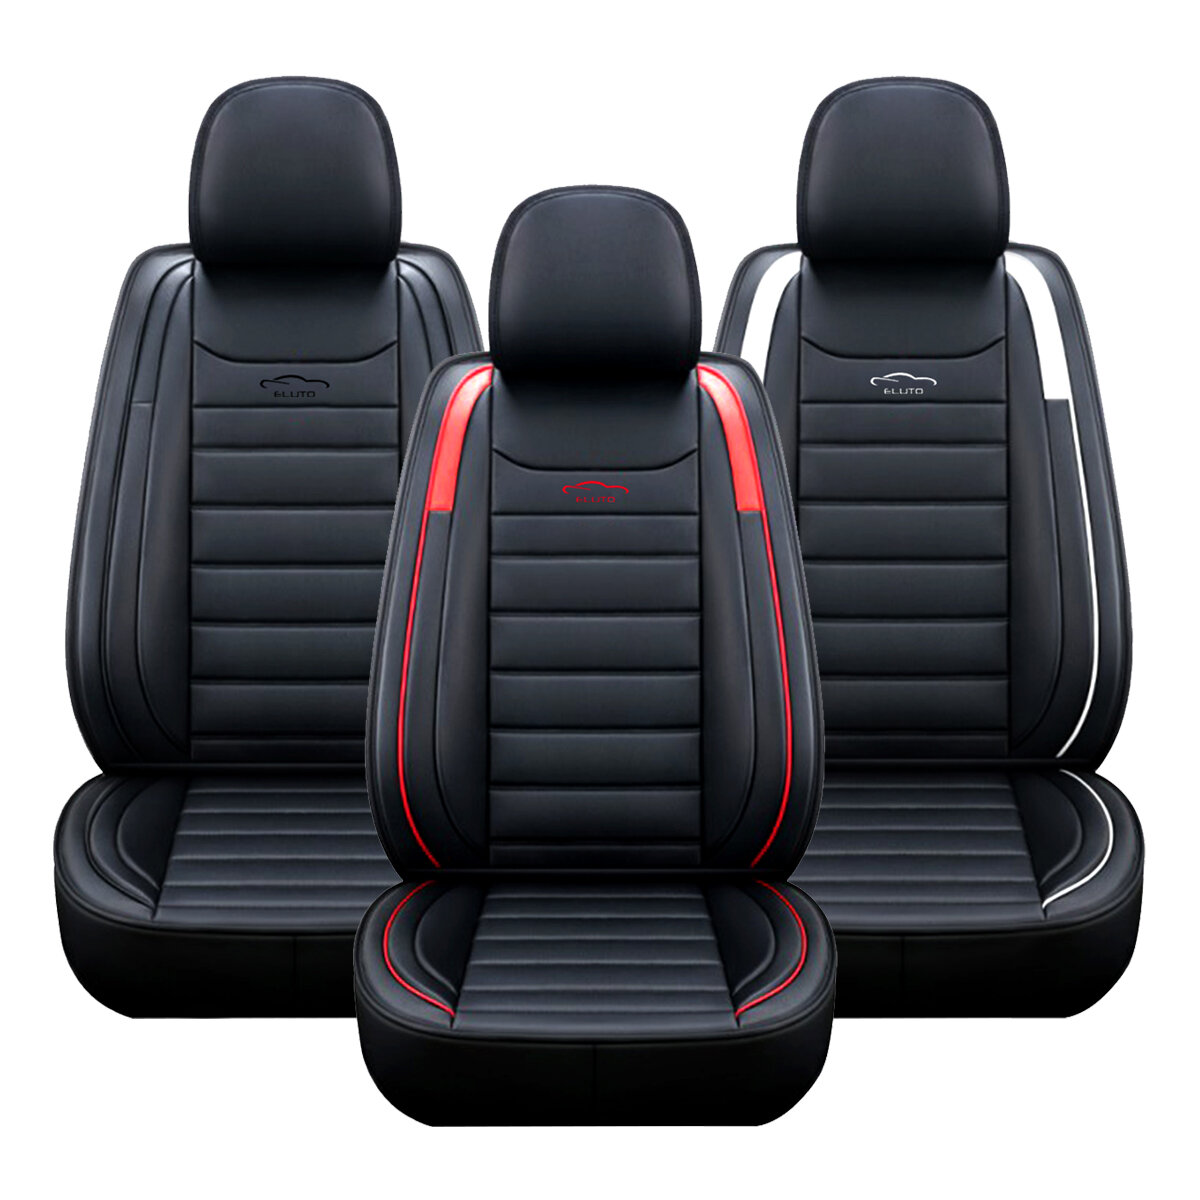 Image of 5 Seats Universal Car Seat Covers Deluxe PU Leather Seat Cushion Full Set Cover